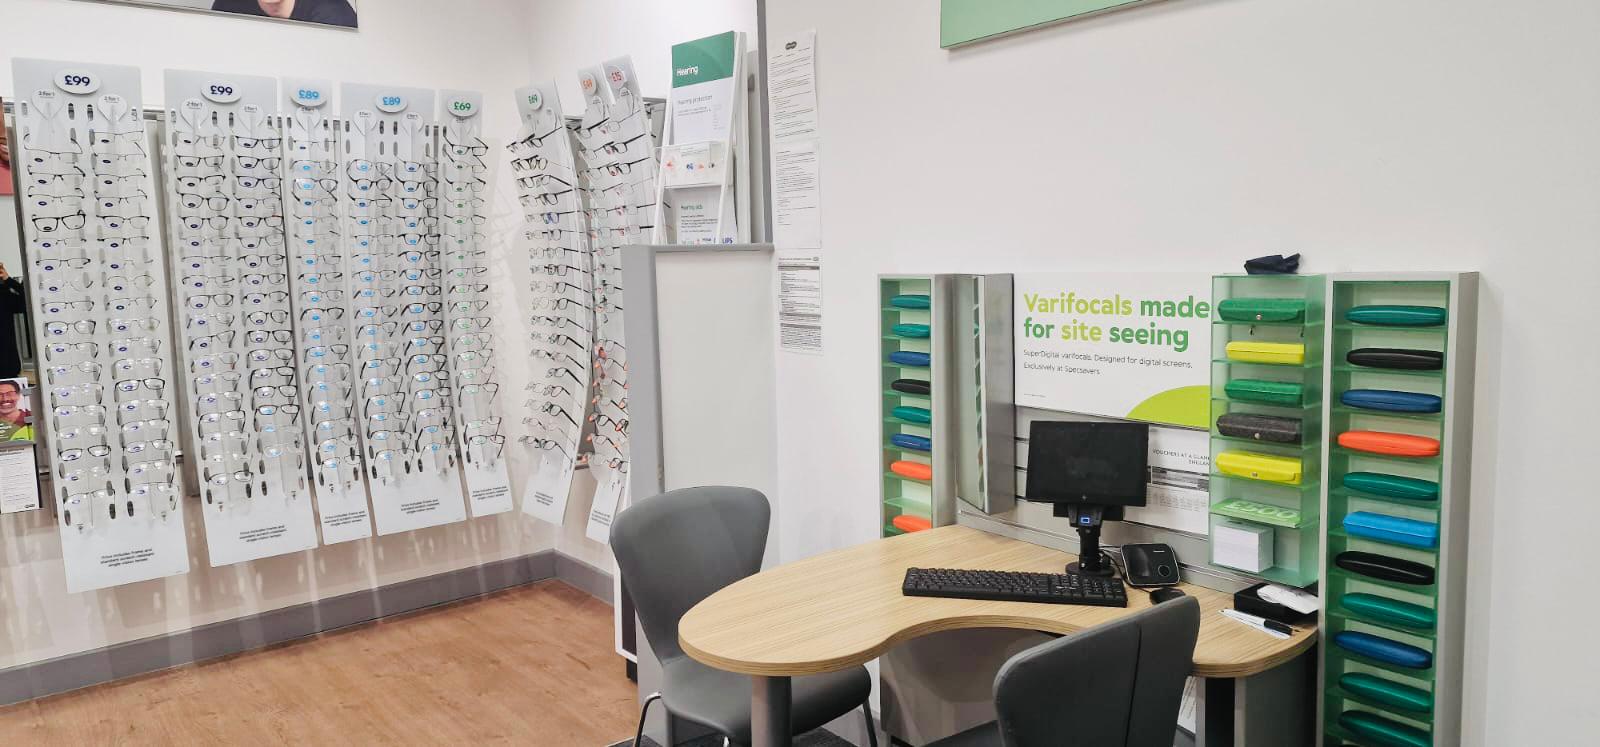 Images Specsavers Opticians and Audiologists - Winchmore Hill Sainsbury's